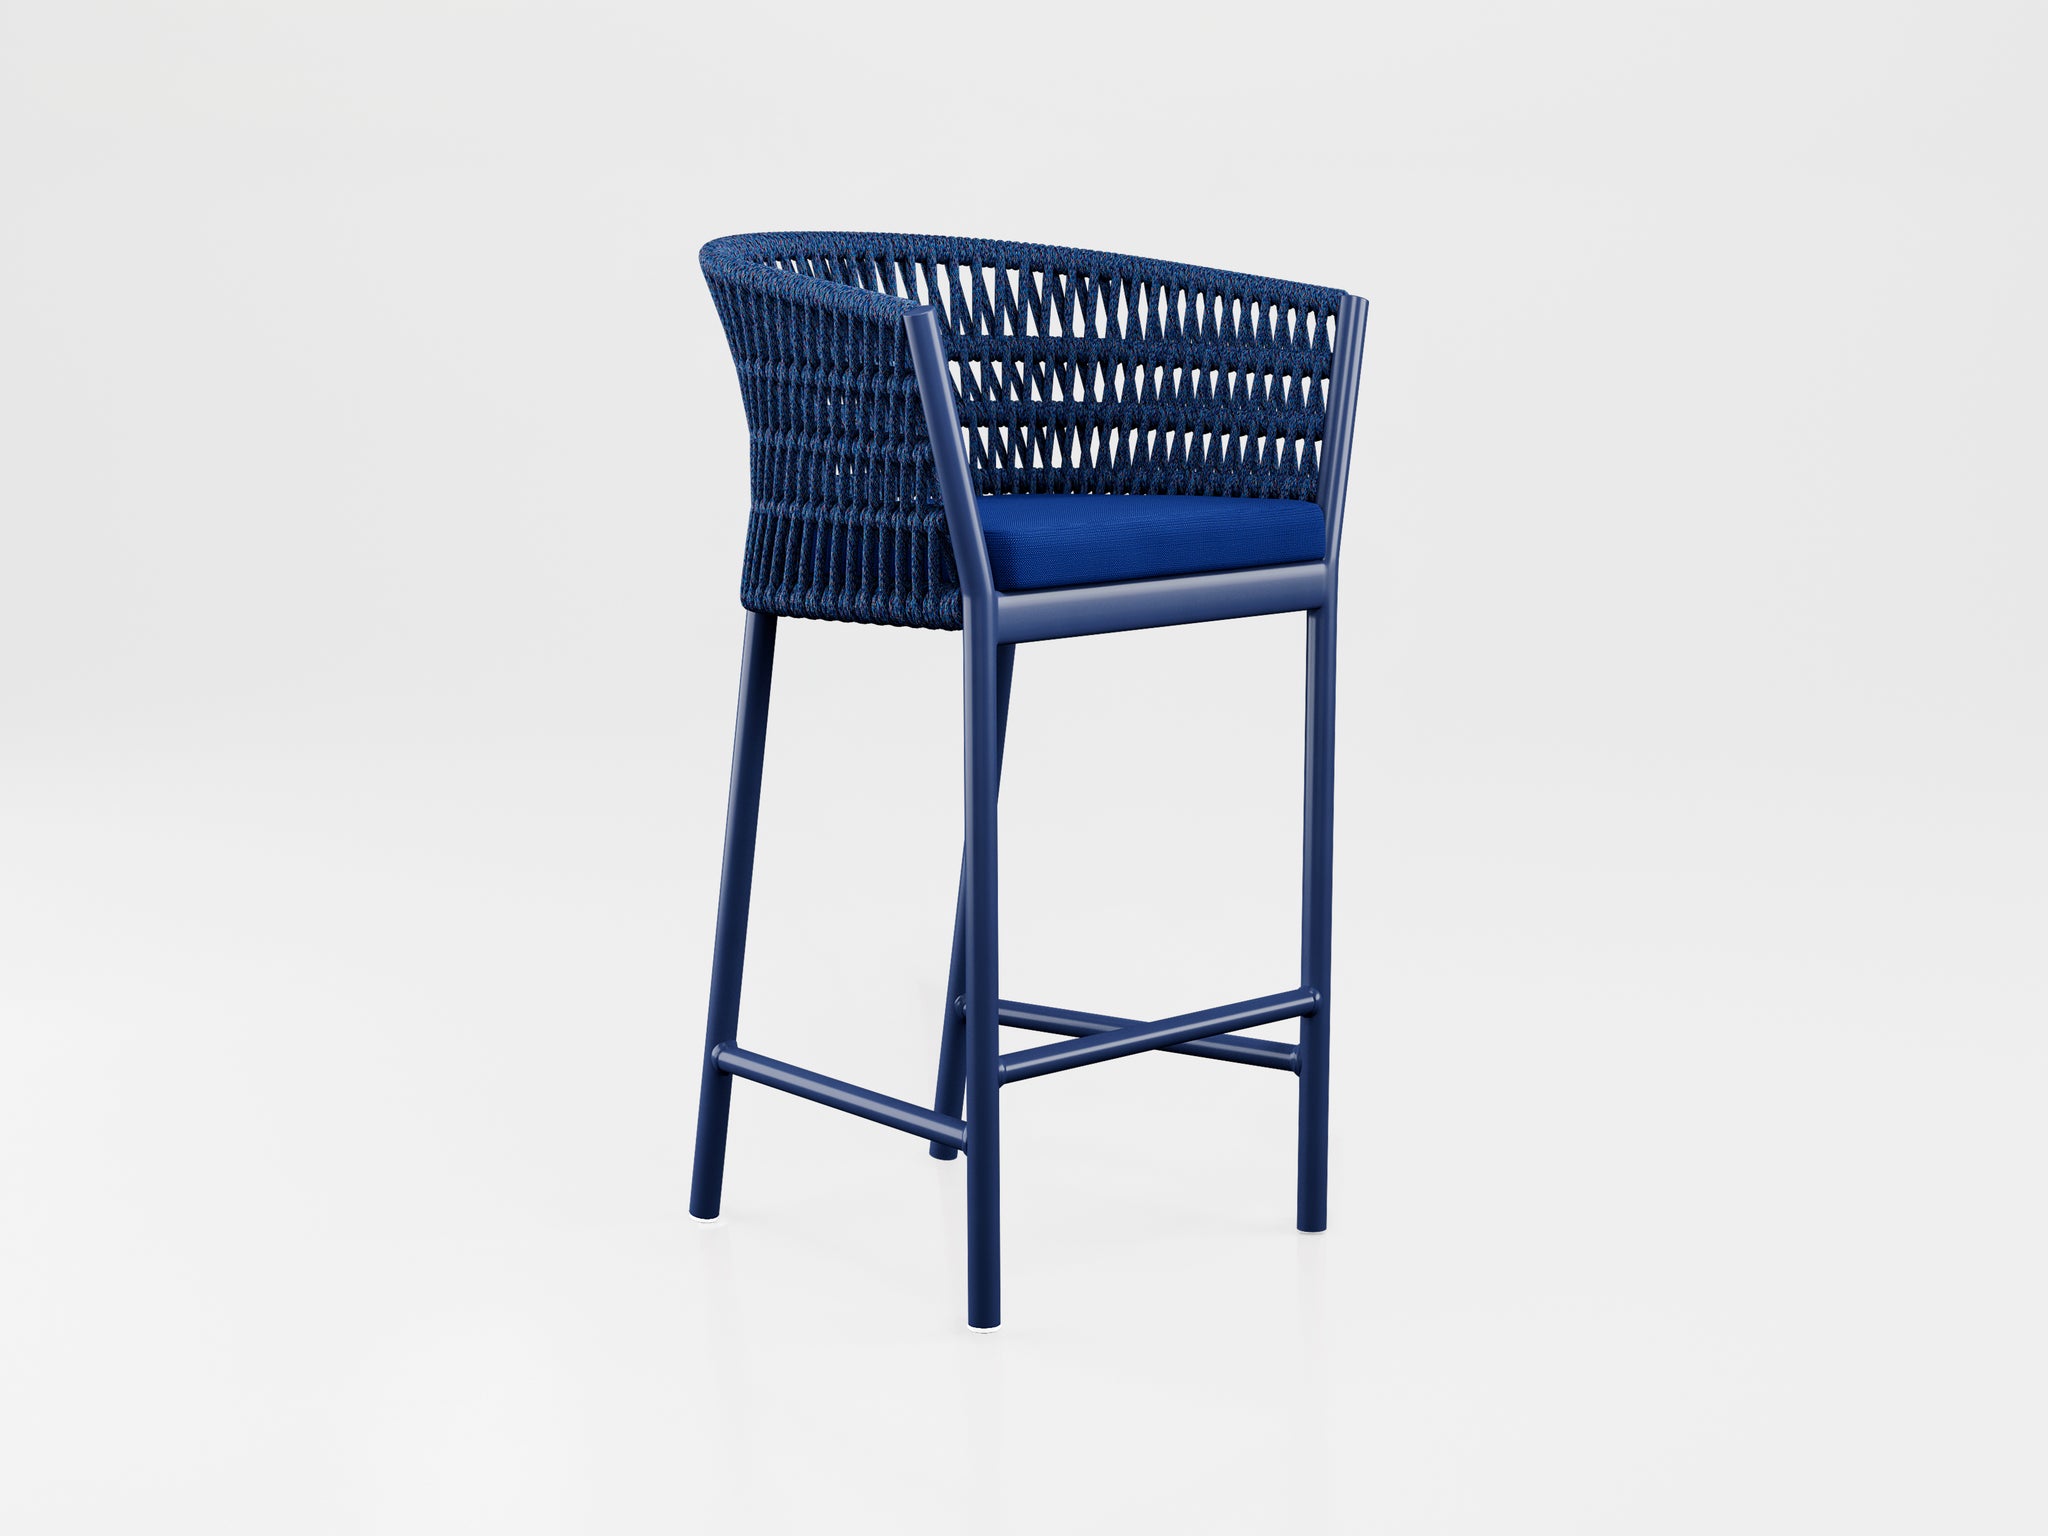 Kauai Bar Stool with aluminum estruture, nautical rope finishing, stone top and Includes seat and back cushions upholstery, designed by Luciano Mandelli